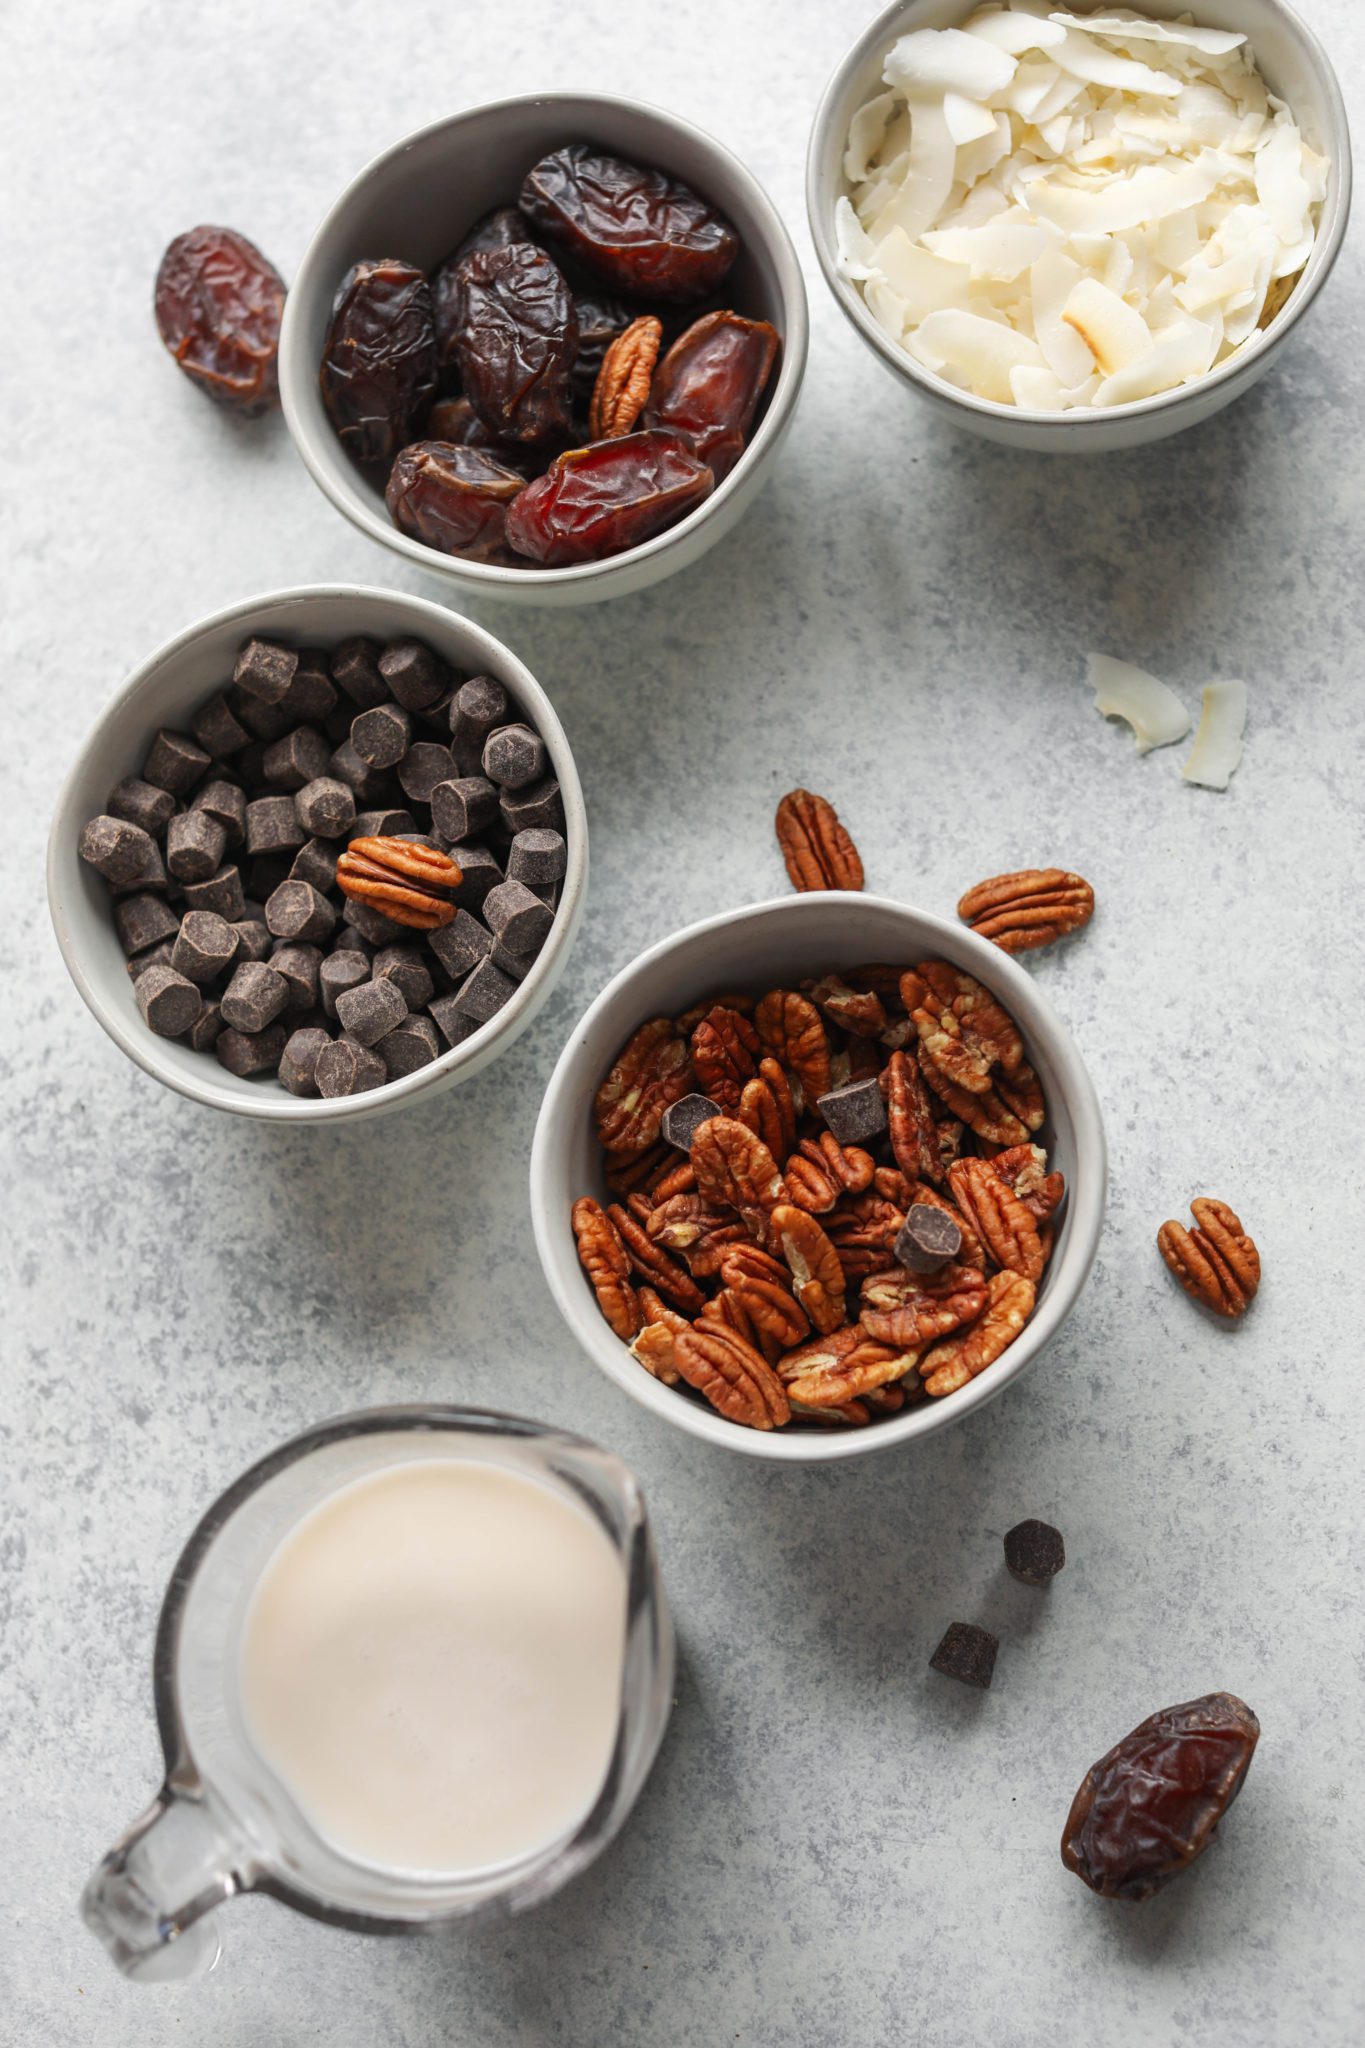 shredded coconut, Medjool dates, dark chocolate chips, pecans, and almond milk on board by Flora & Vino